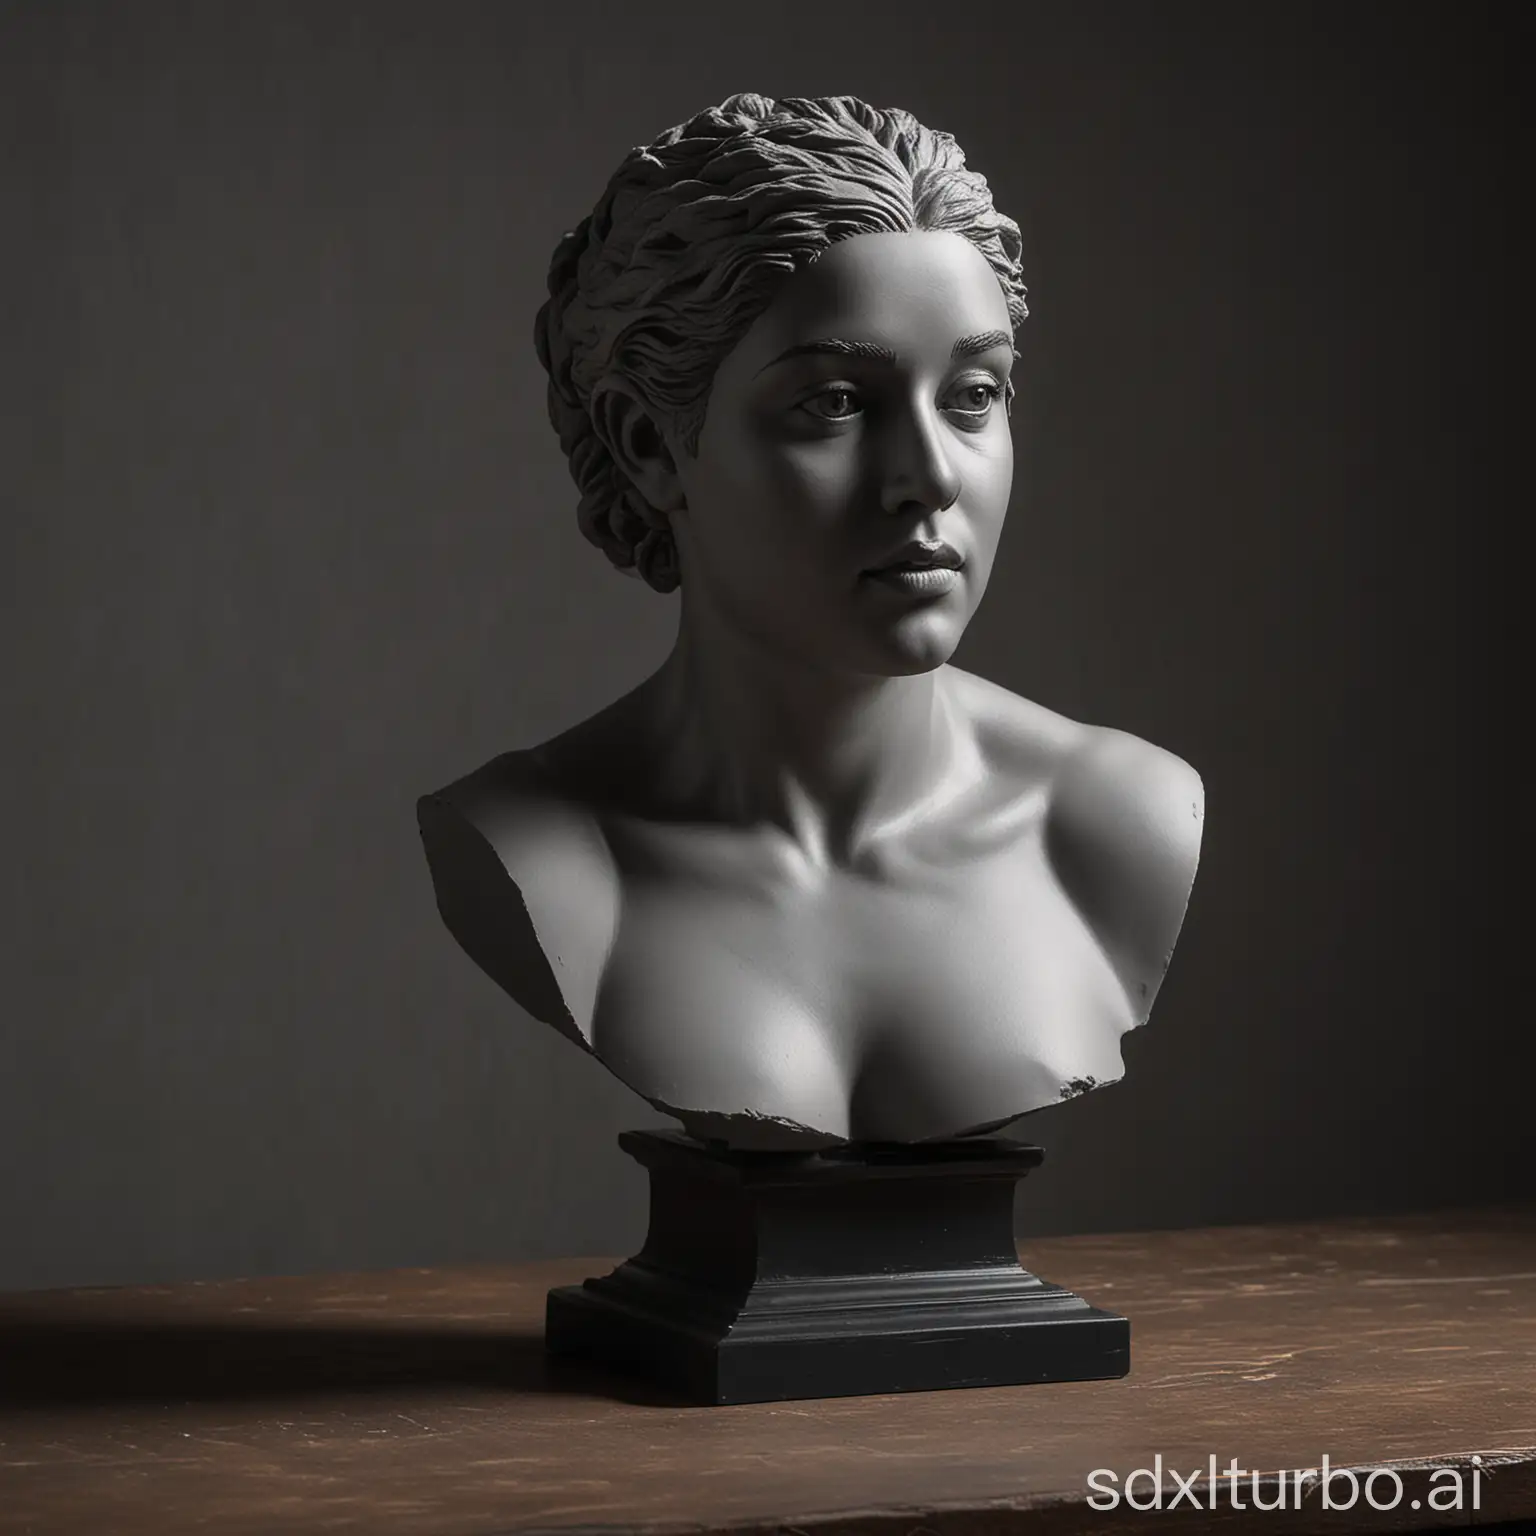 Dramatic-Studio-Bust-Sculpture-with-Hard-Lighting